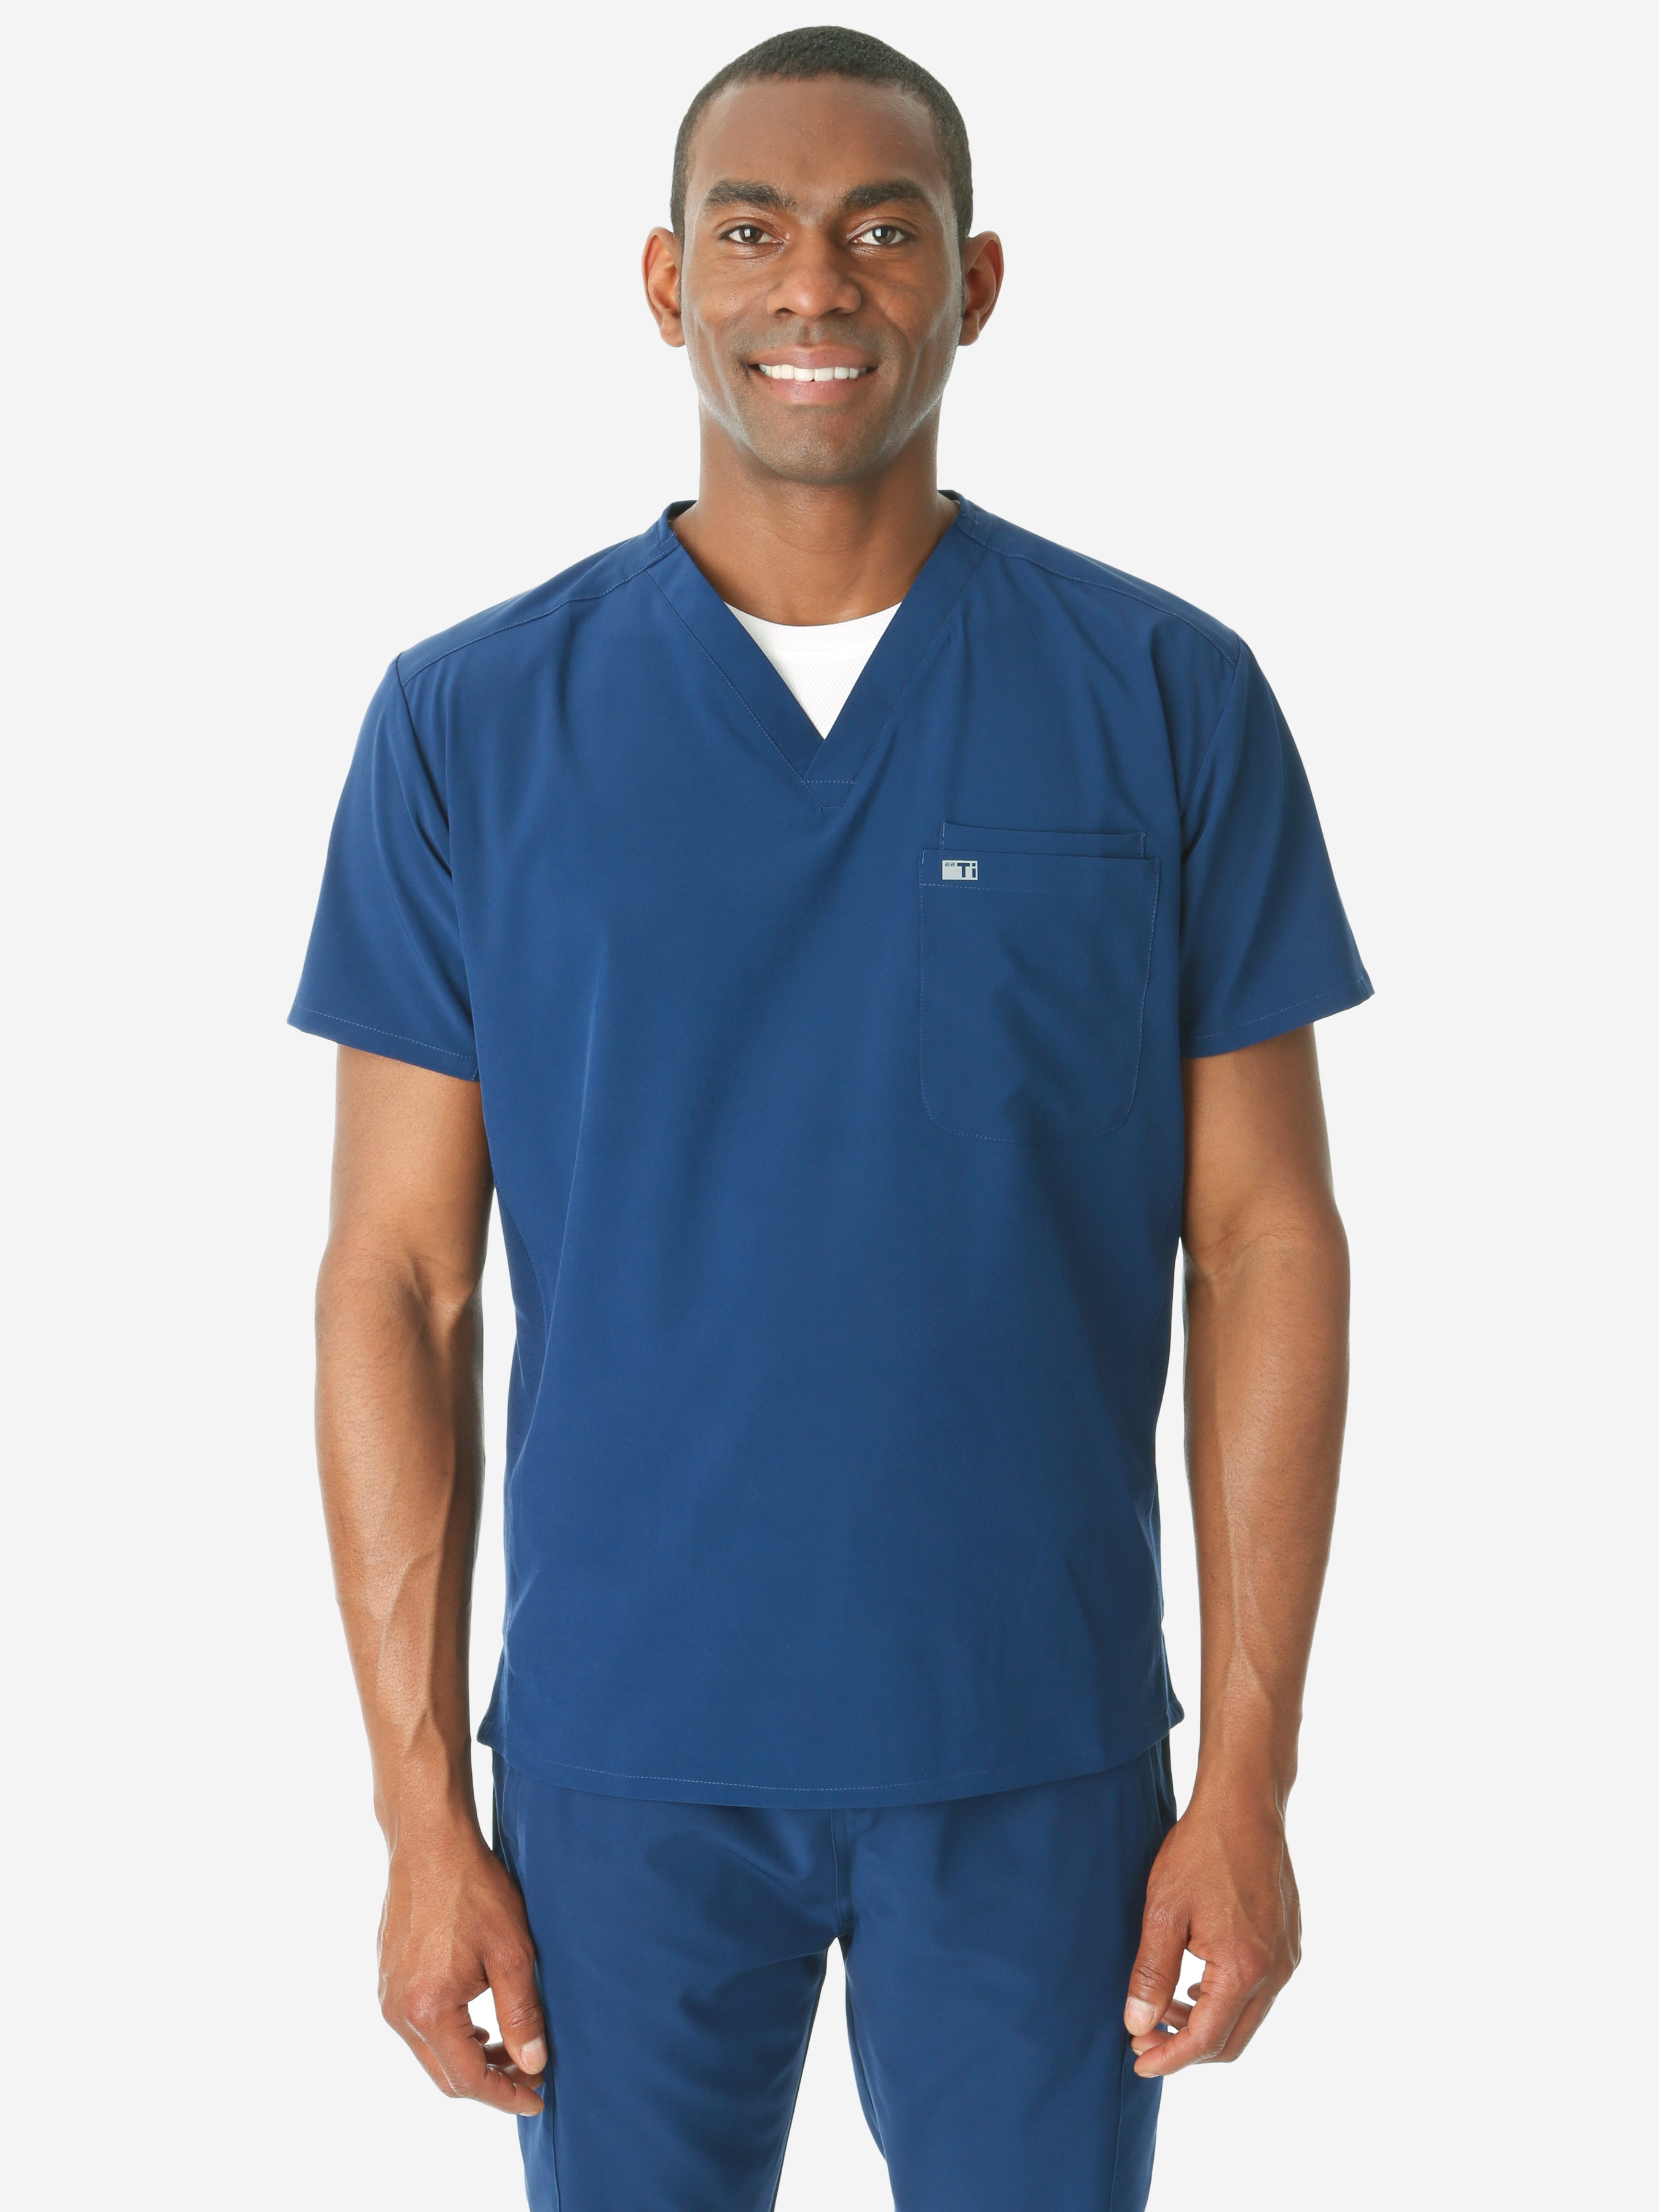 TiScrubs White Men's Mesh Short-Sleeve Underscrub Top Only Front with Navy Double-Pocket Top